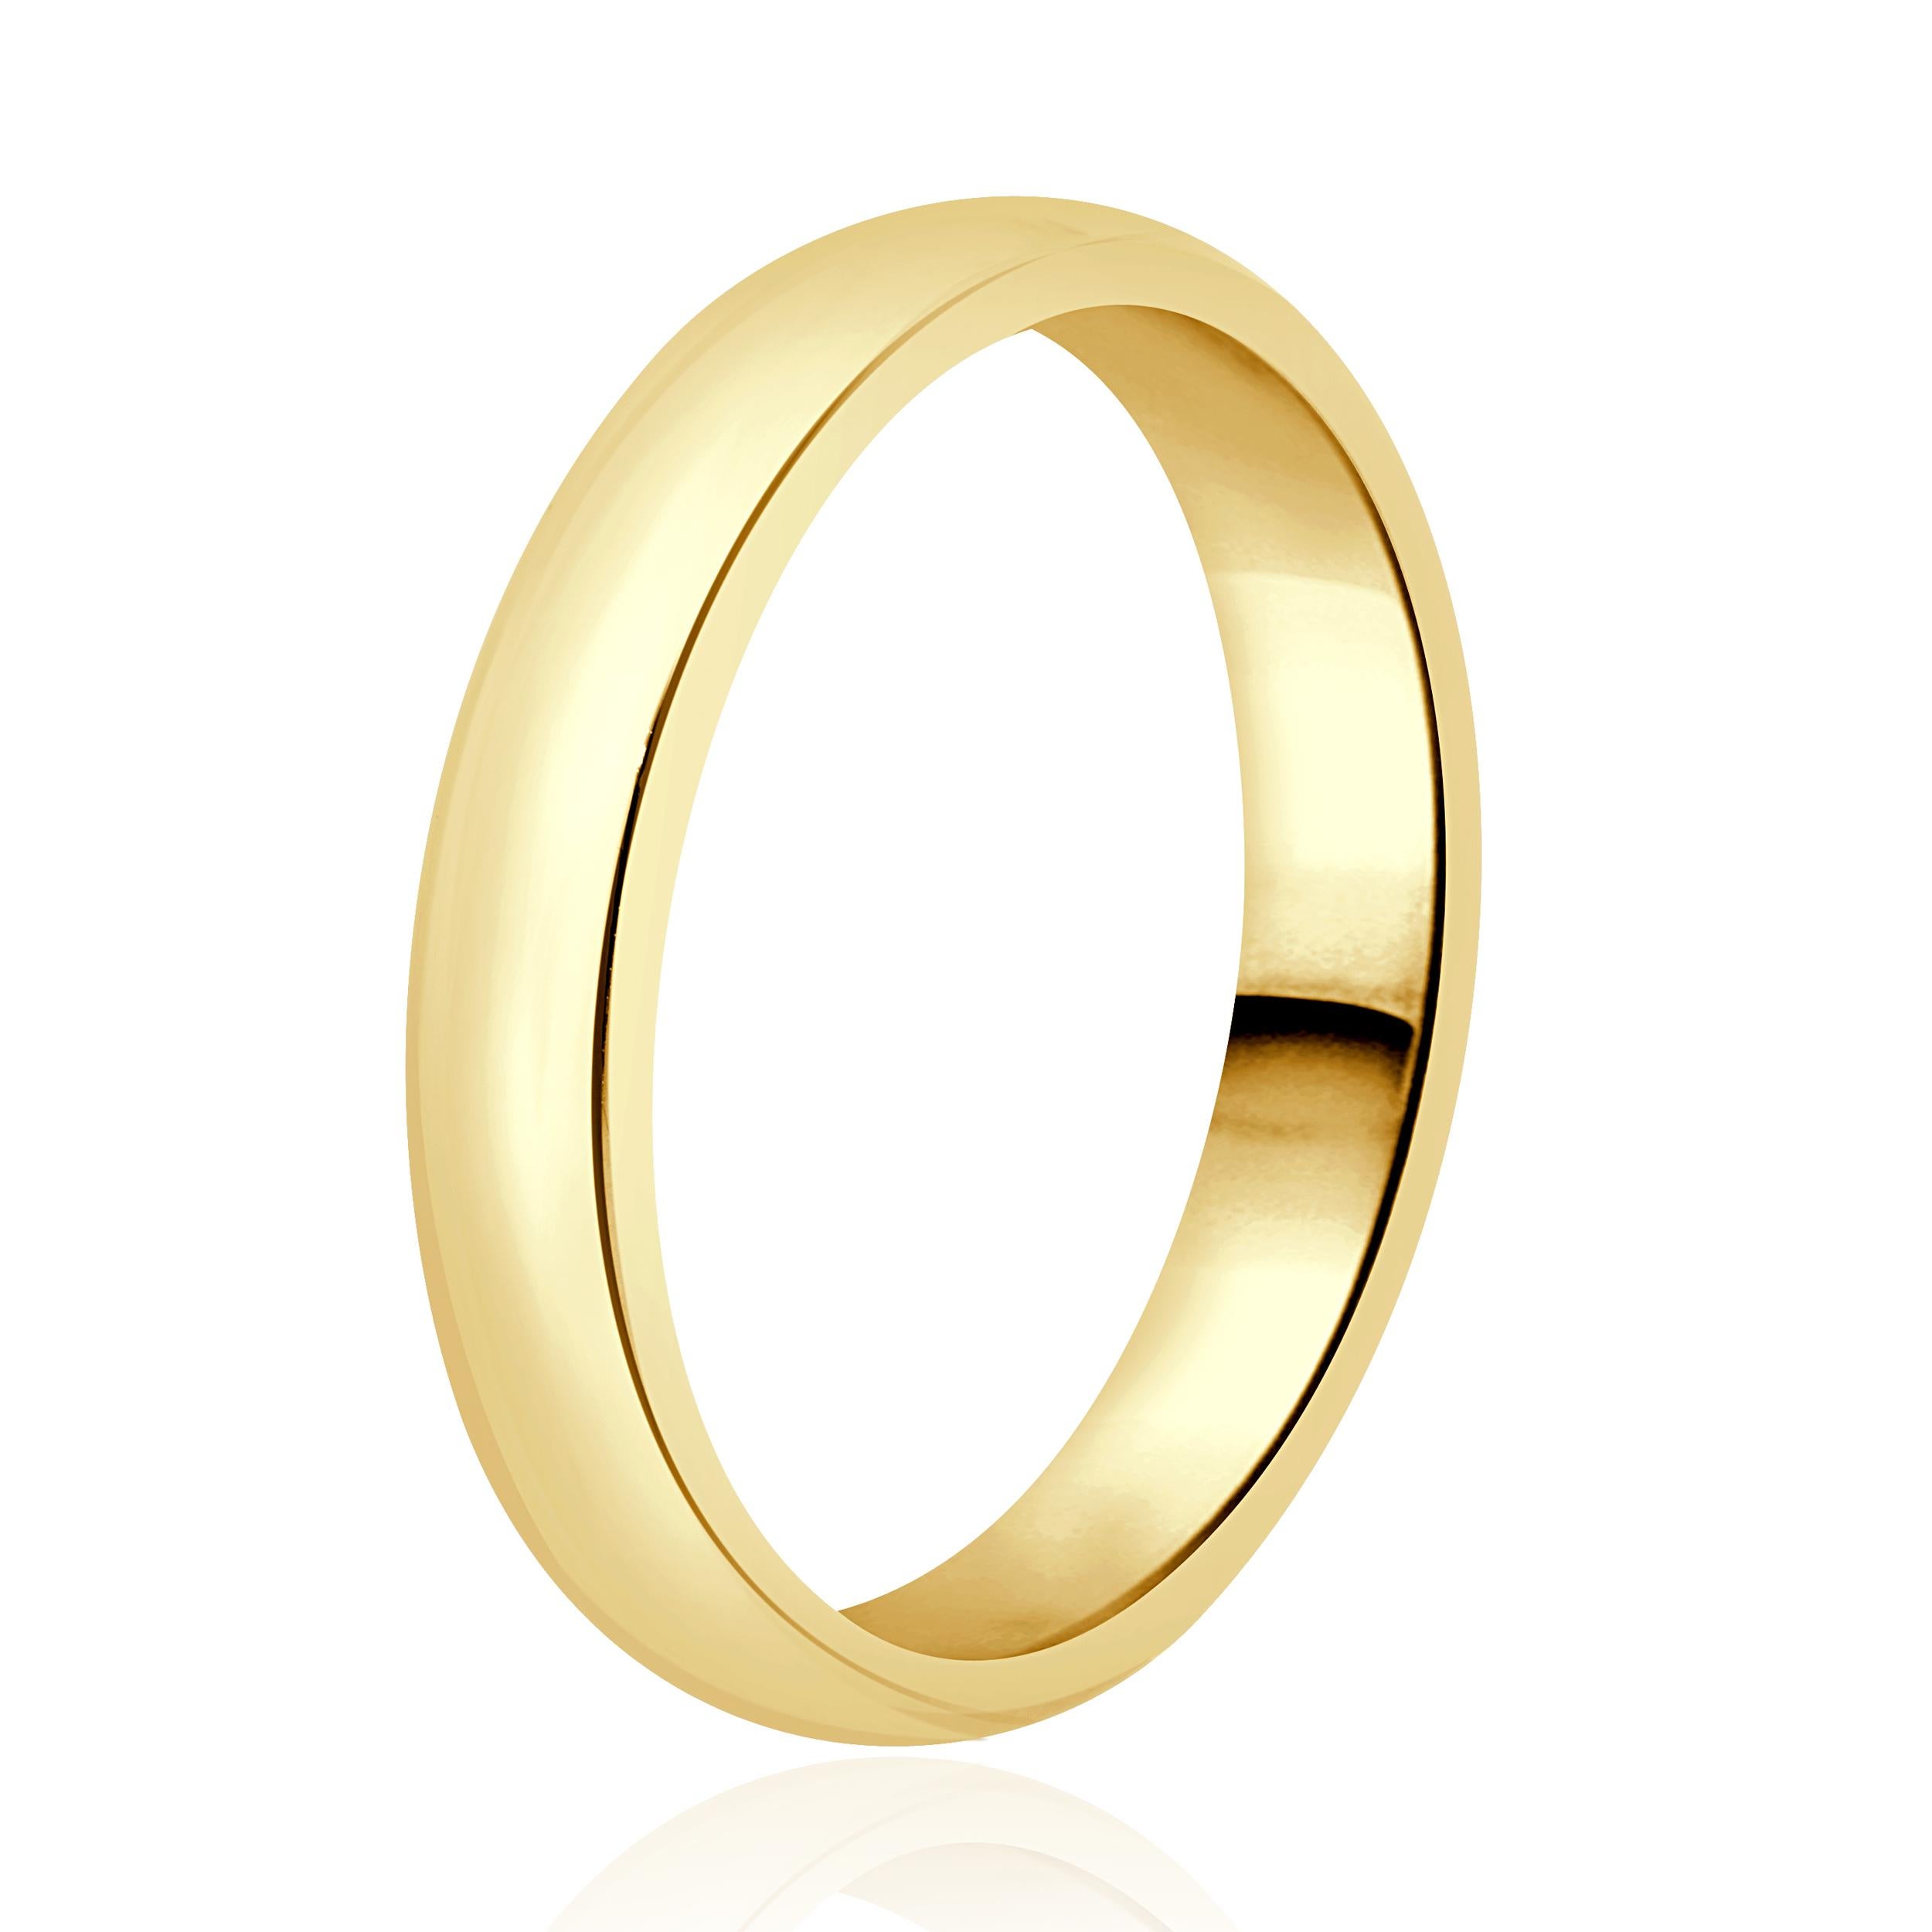 
Designer: Tiffany & Co. 
Material: 18K yellow gold
Dimensions: ring top measures 5mm wide
Weight: 8.08 grams
Size: 13 sizing available 

No box or papers included
